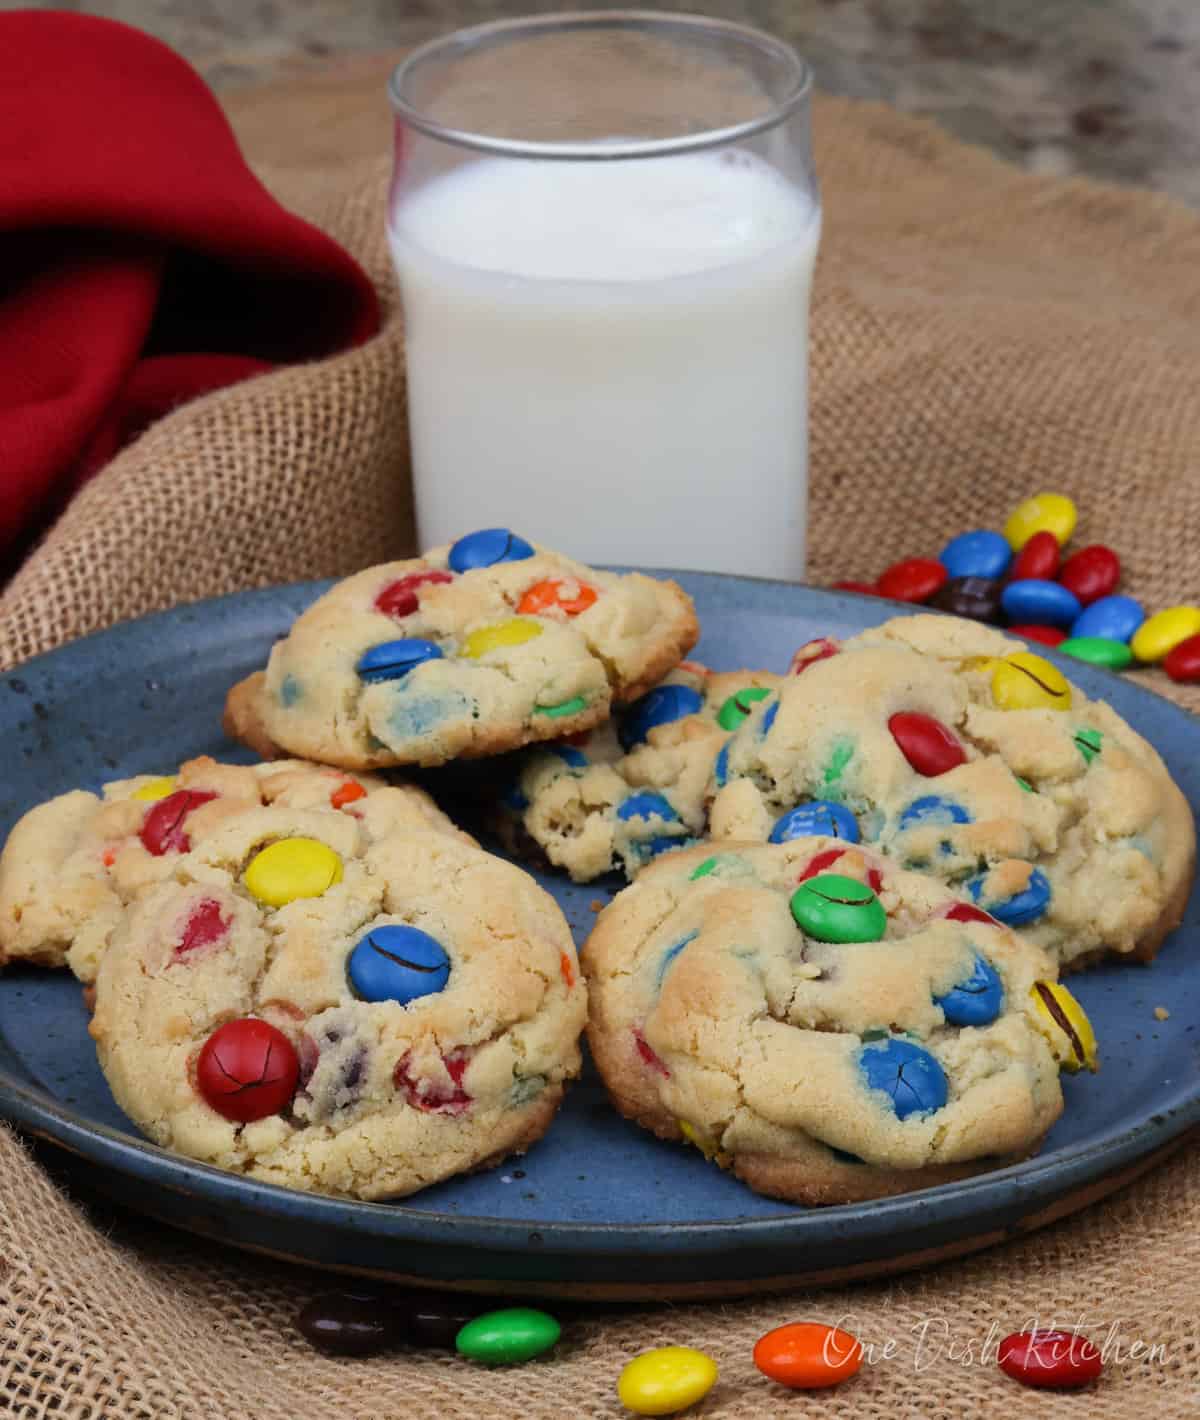 colorful M&M cookies on a blue plate next to a red napkin and a glass of milk.